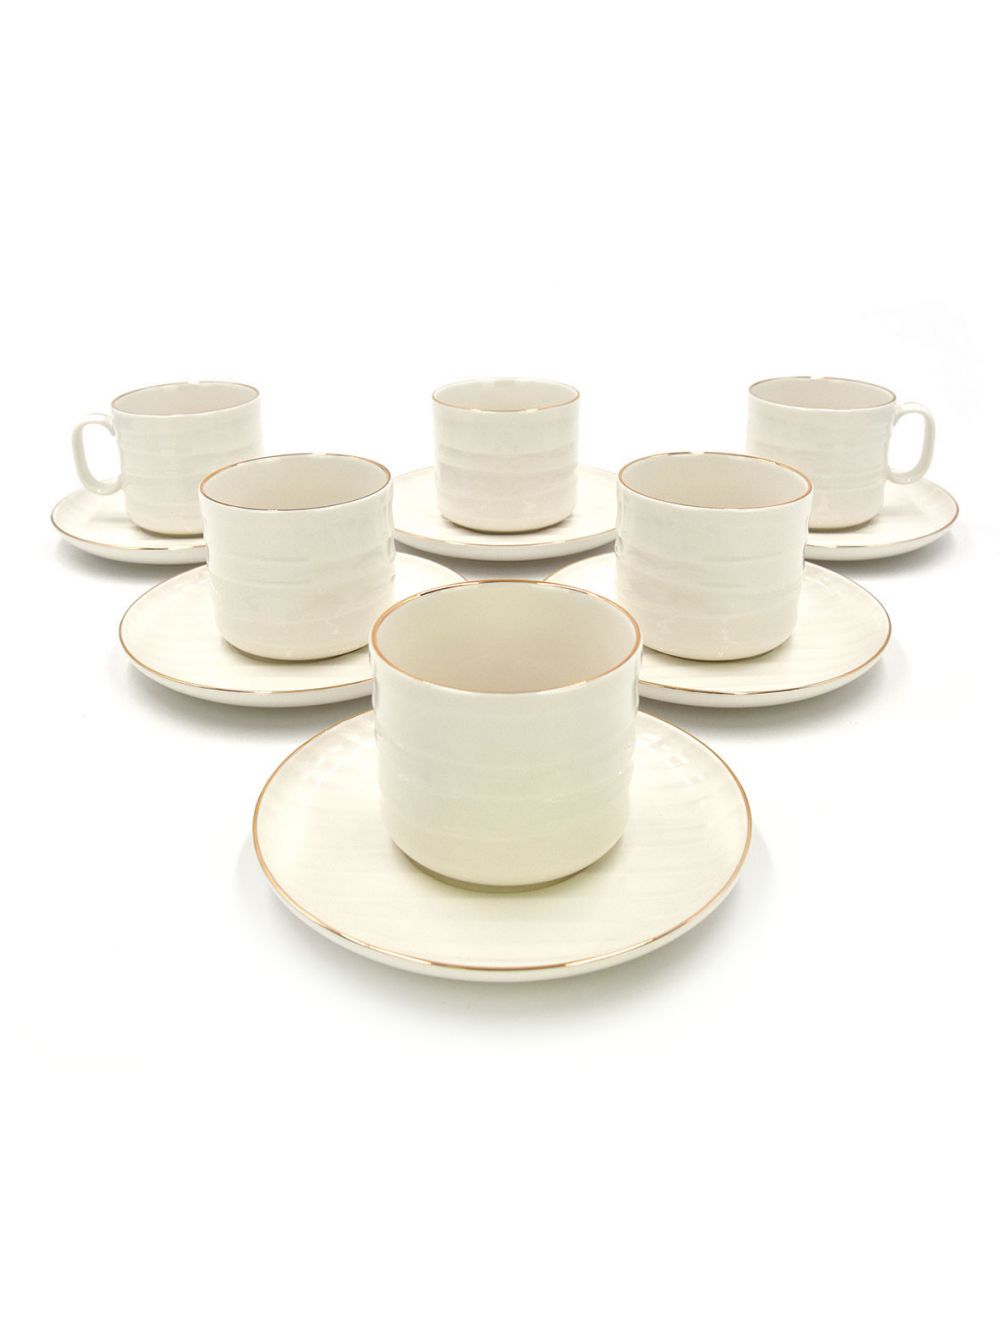 Qualitier Tea Cup and Saucer 12 Pieces Set White/Gold 180 ml